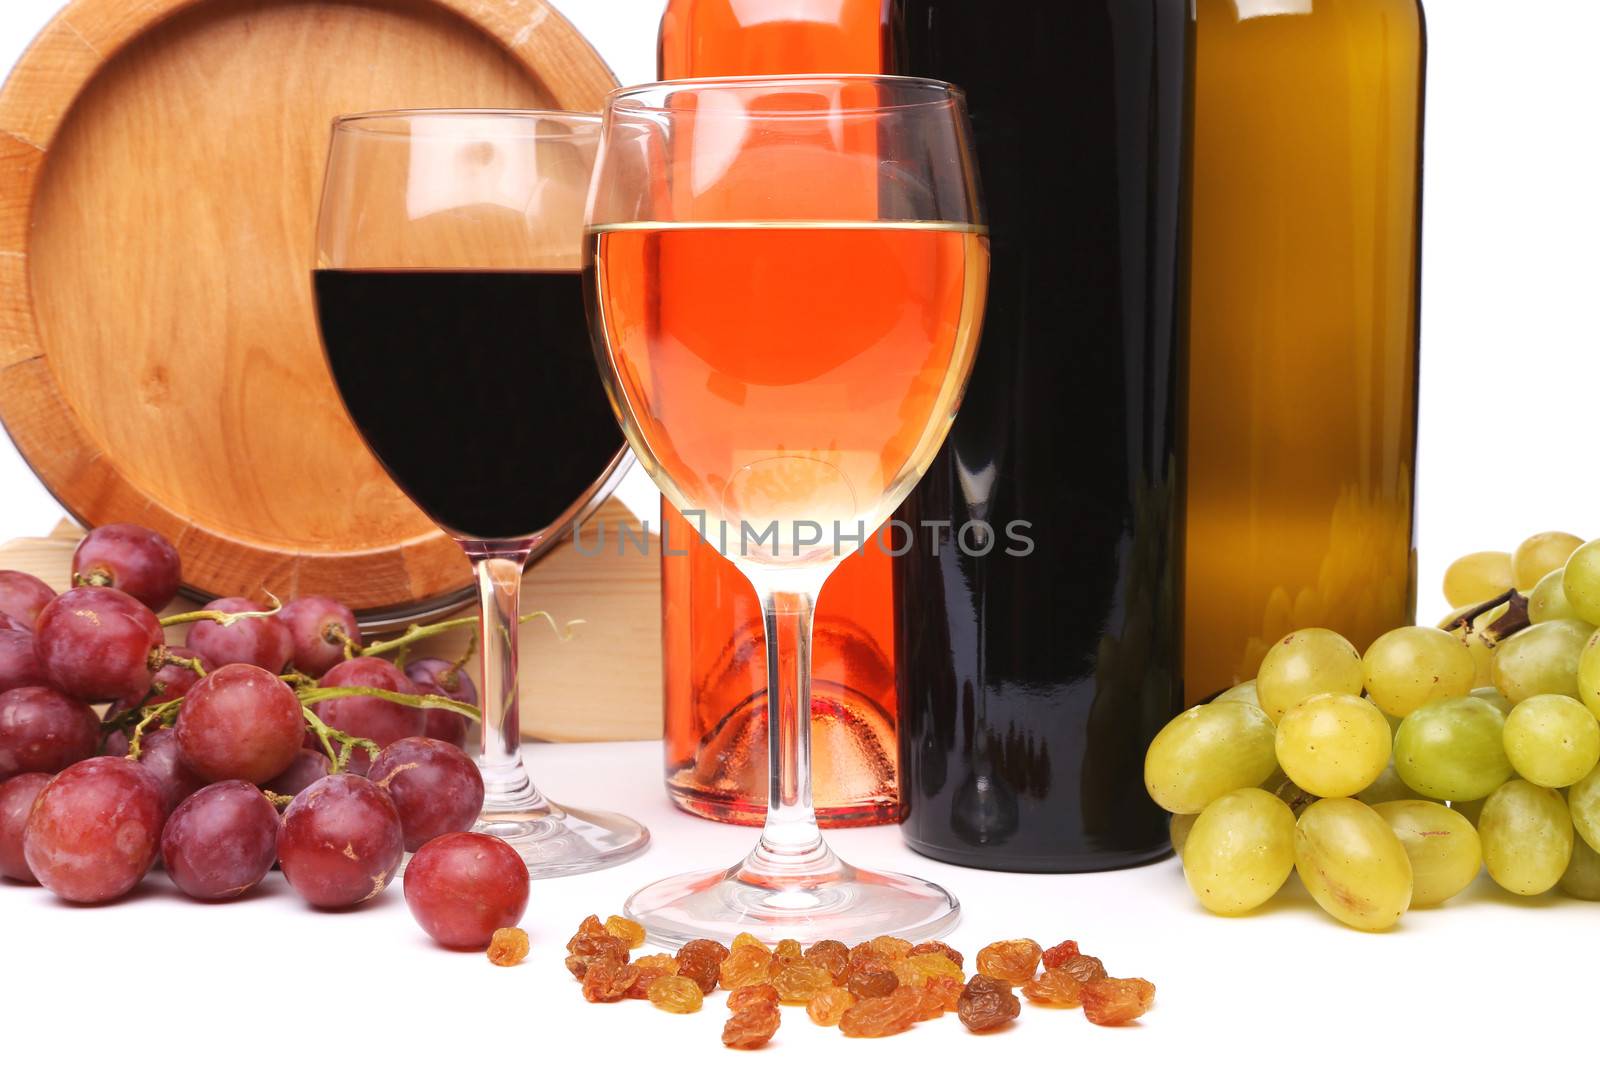 barrel, bottles and glasses of wine and ripe grapes on wooden